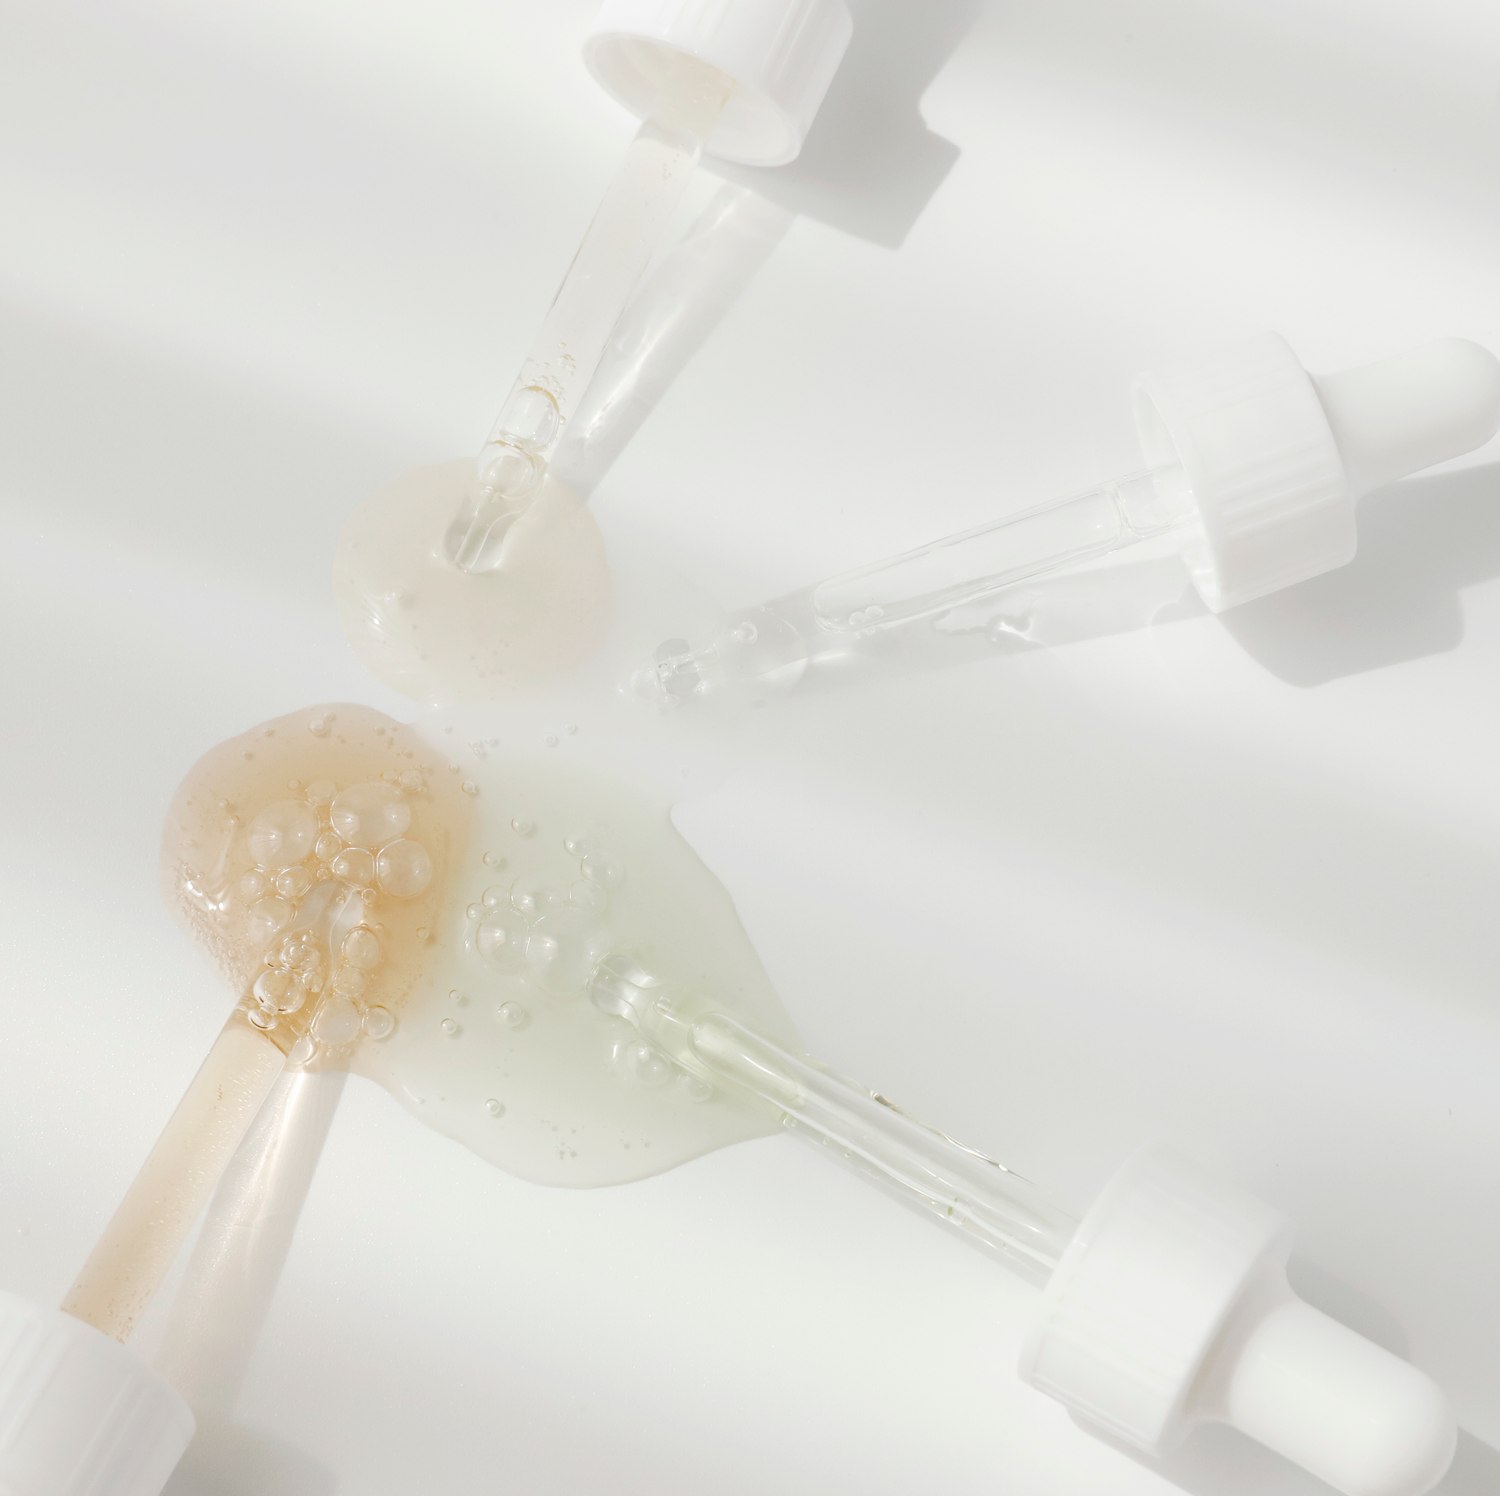 AMPOULES &amp; SERUMS